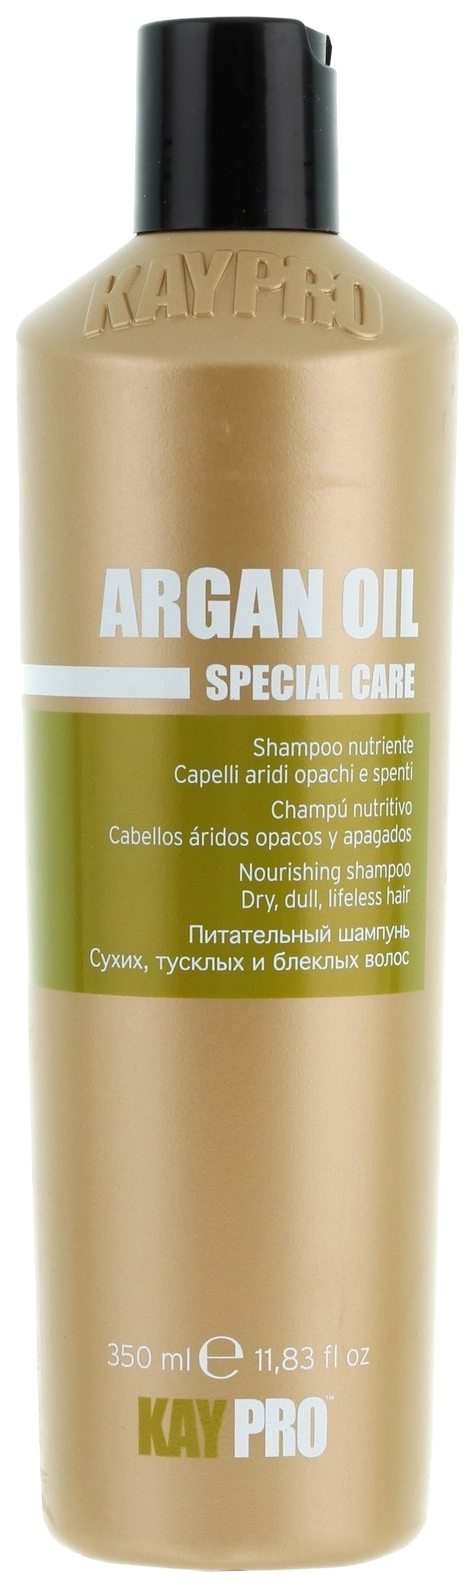 Шампунь KayPro Special Care Argan Oil 350 мл jewelry gift box separate purchase does not ship if you need special packaging please leave a message to customer service